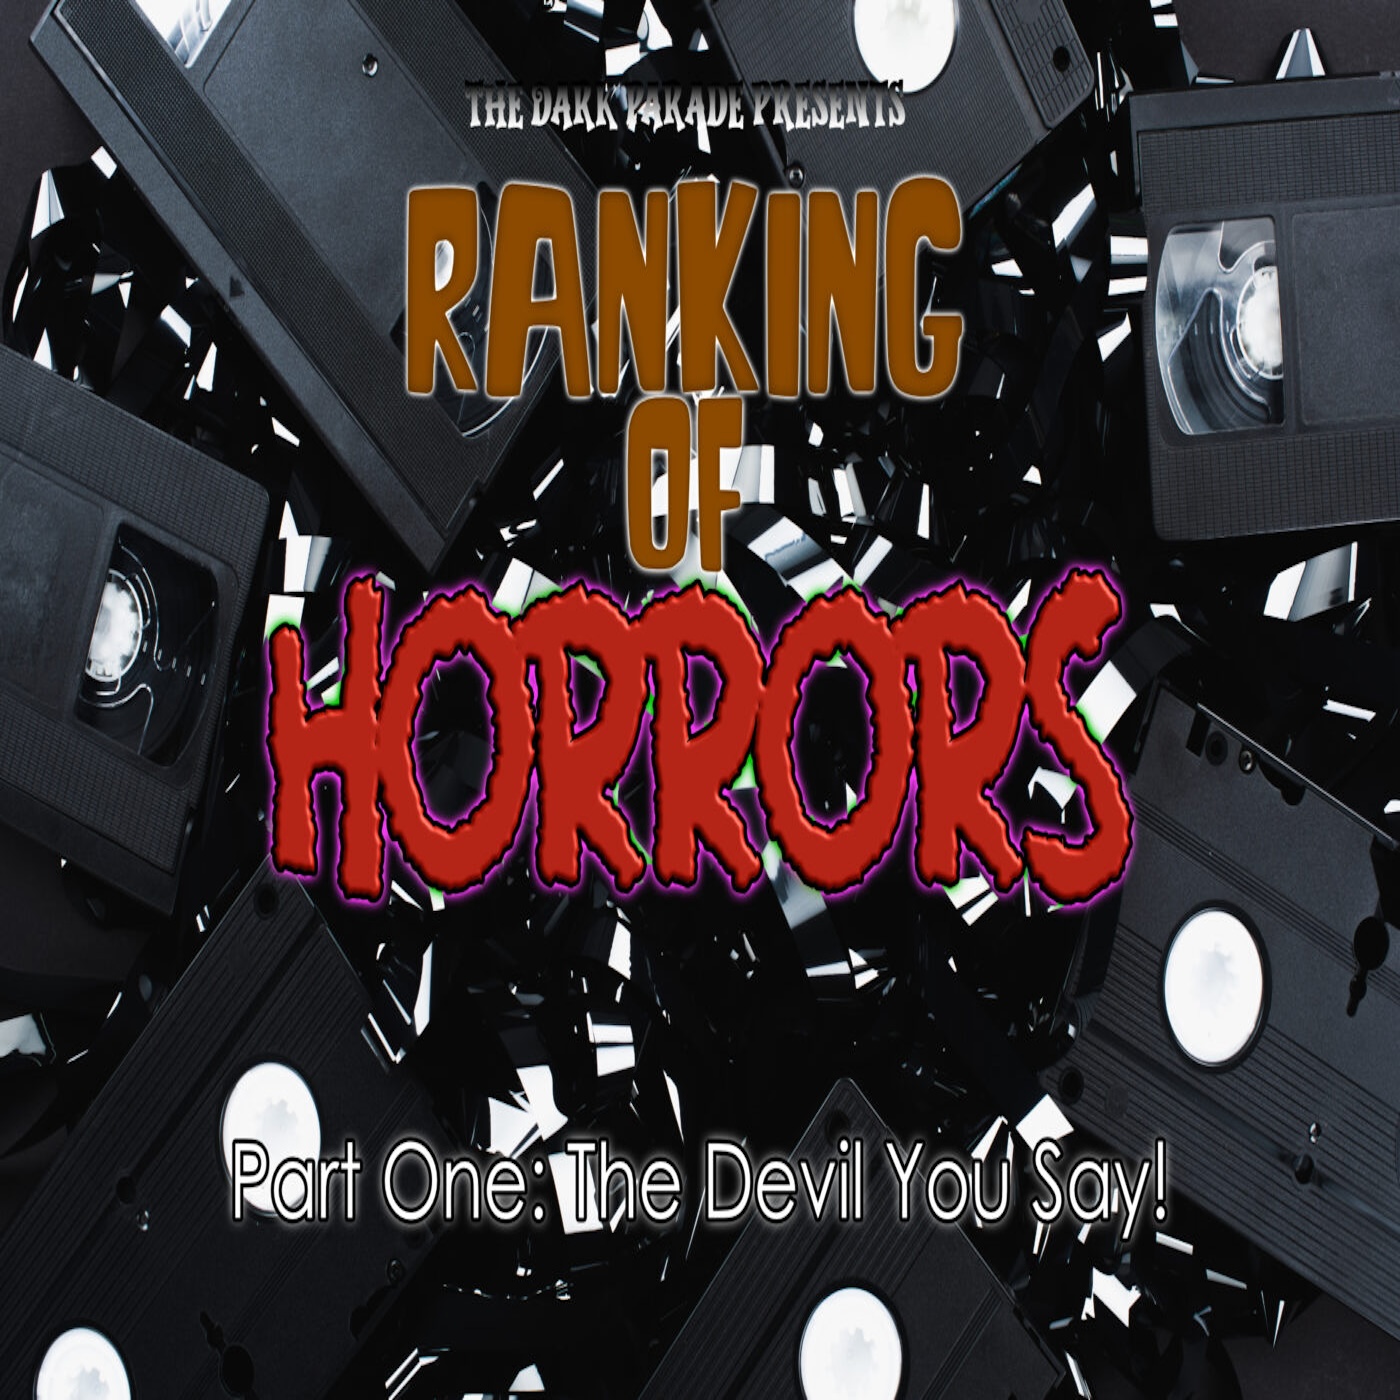 Ranking of Horrors Episode One: The Devil You Say!